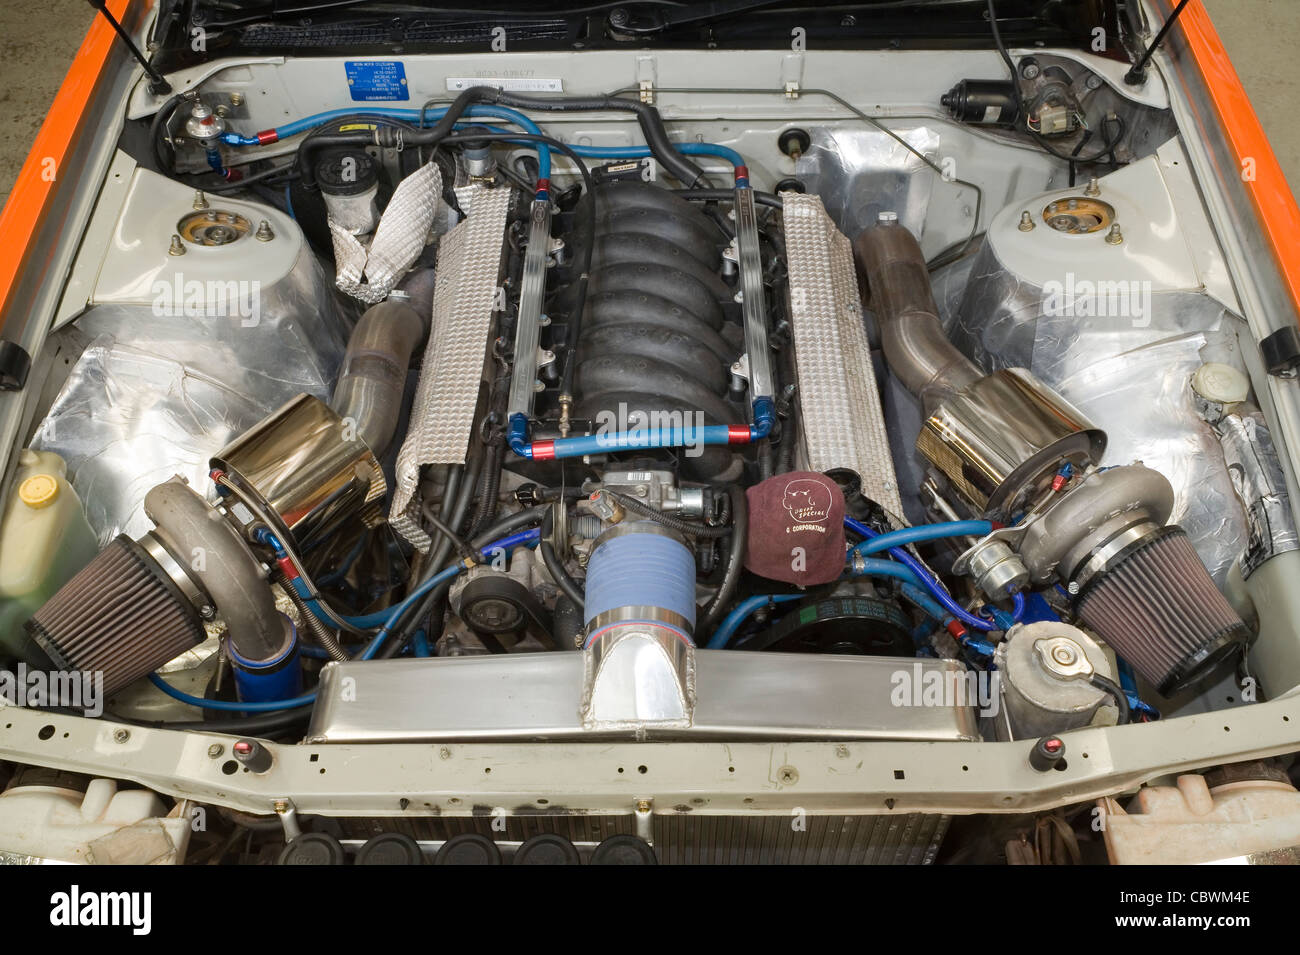 Two twin turbo turbochargers on a heavily modified Chevrolet Vee V 8 eight LS1 engine Stock Photo